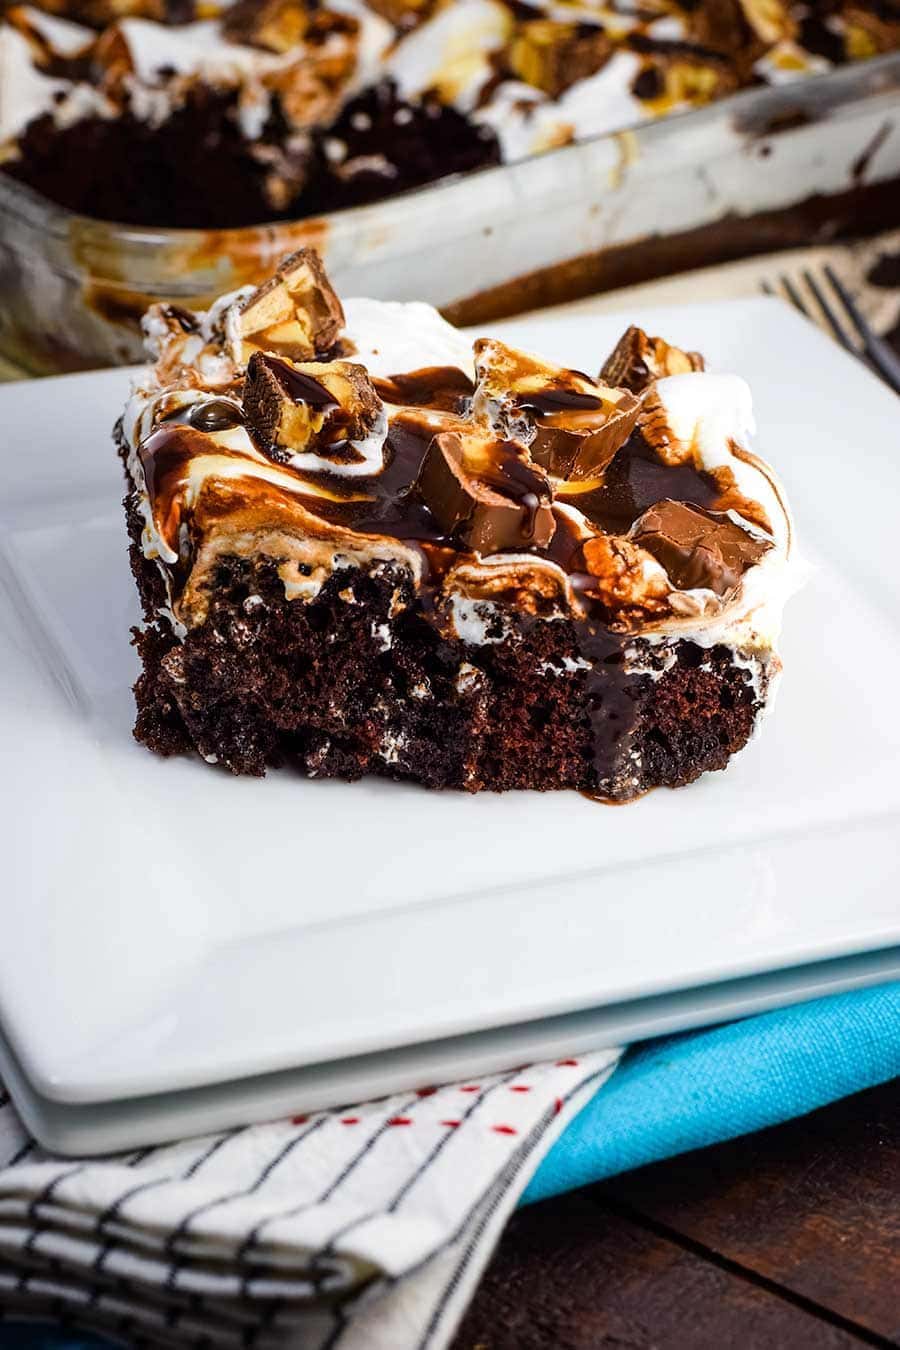 10 Best No Bake Snickers Cake Recipes | Yummly